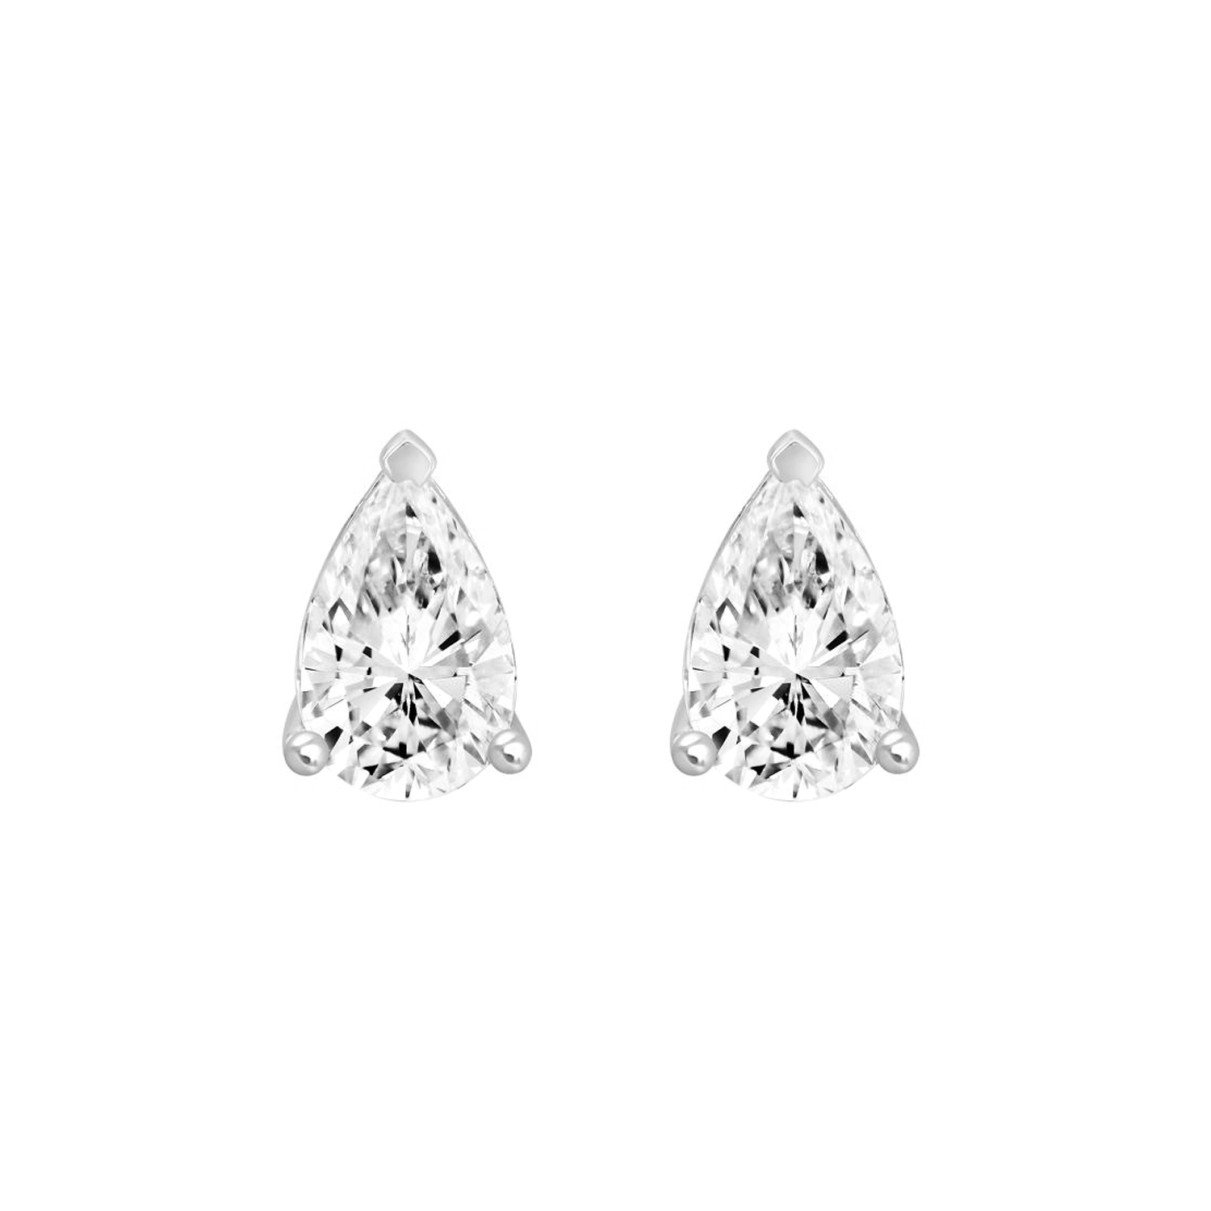 LADIES SOLITAIRE EARRINGS 3CT PEAR DIAMOND 14K WHITE GOLD